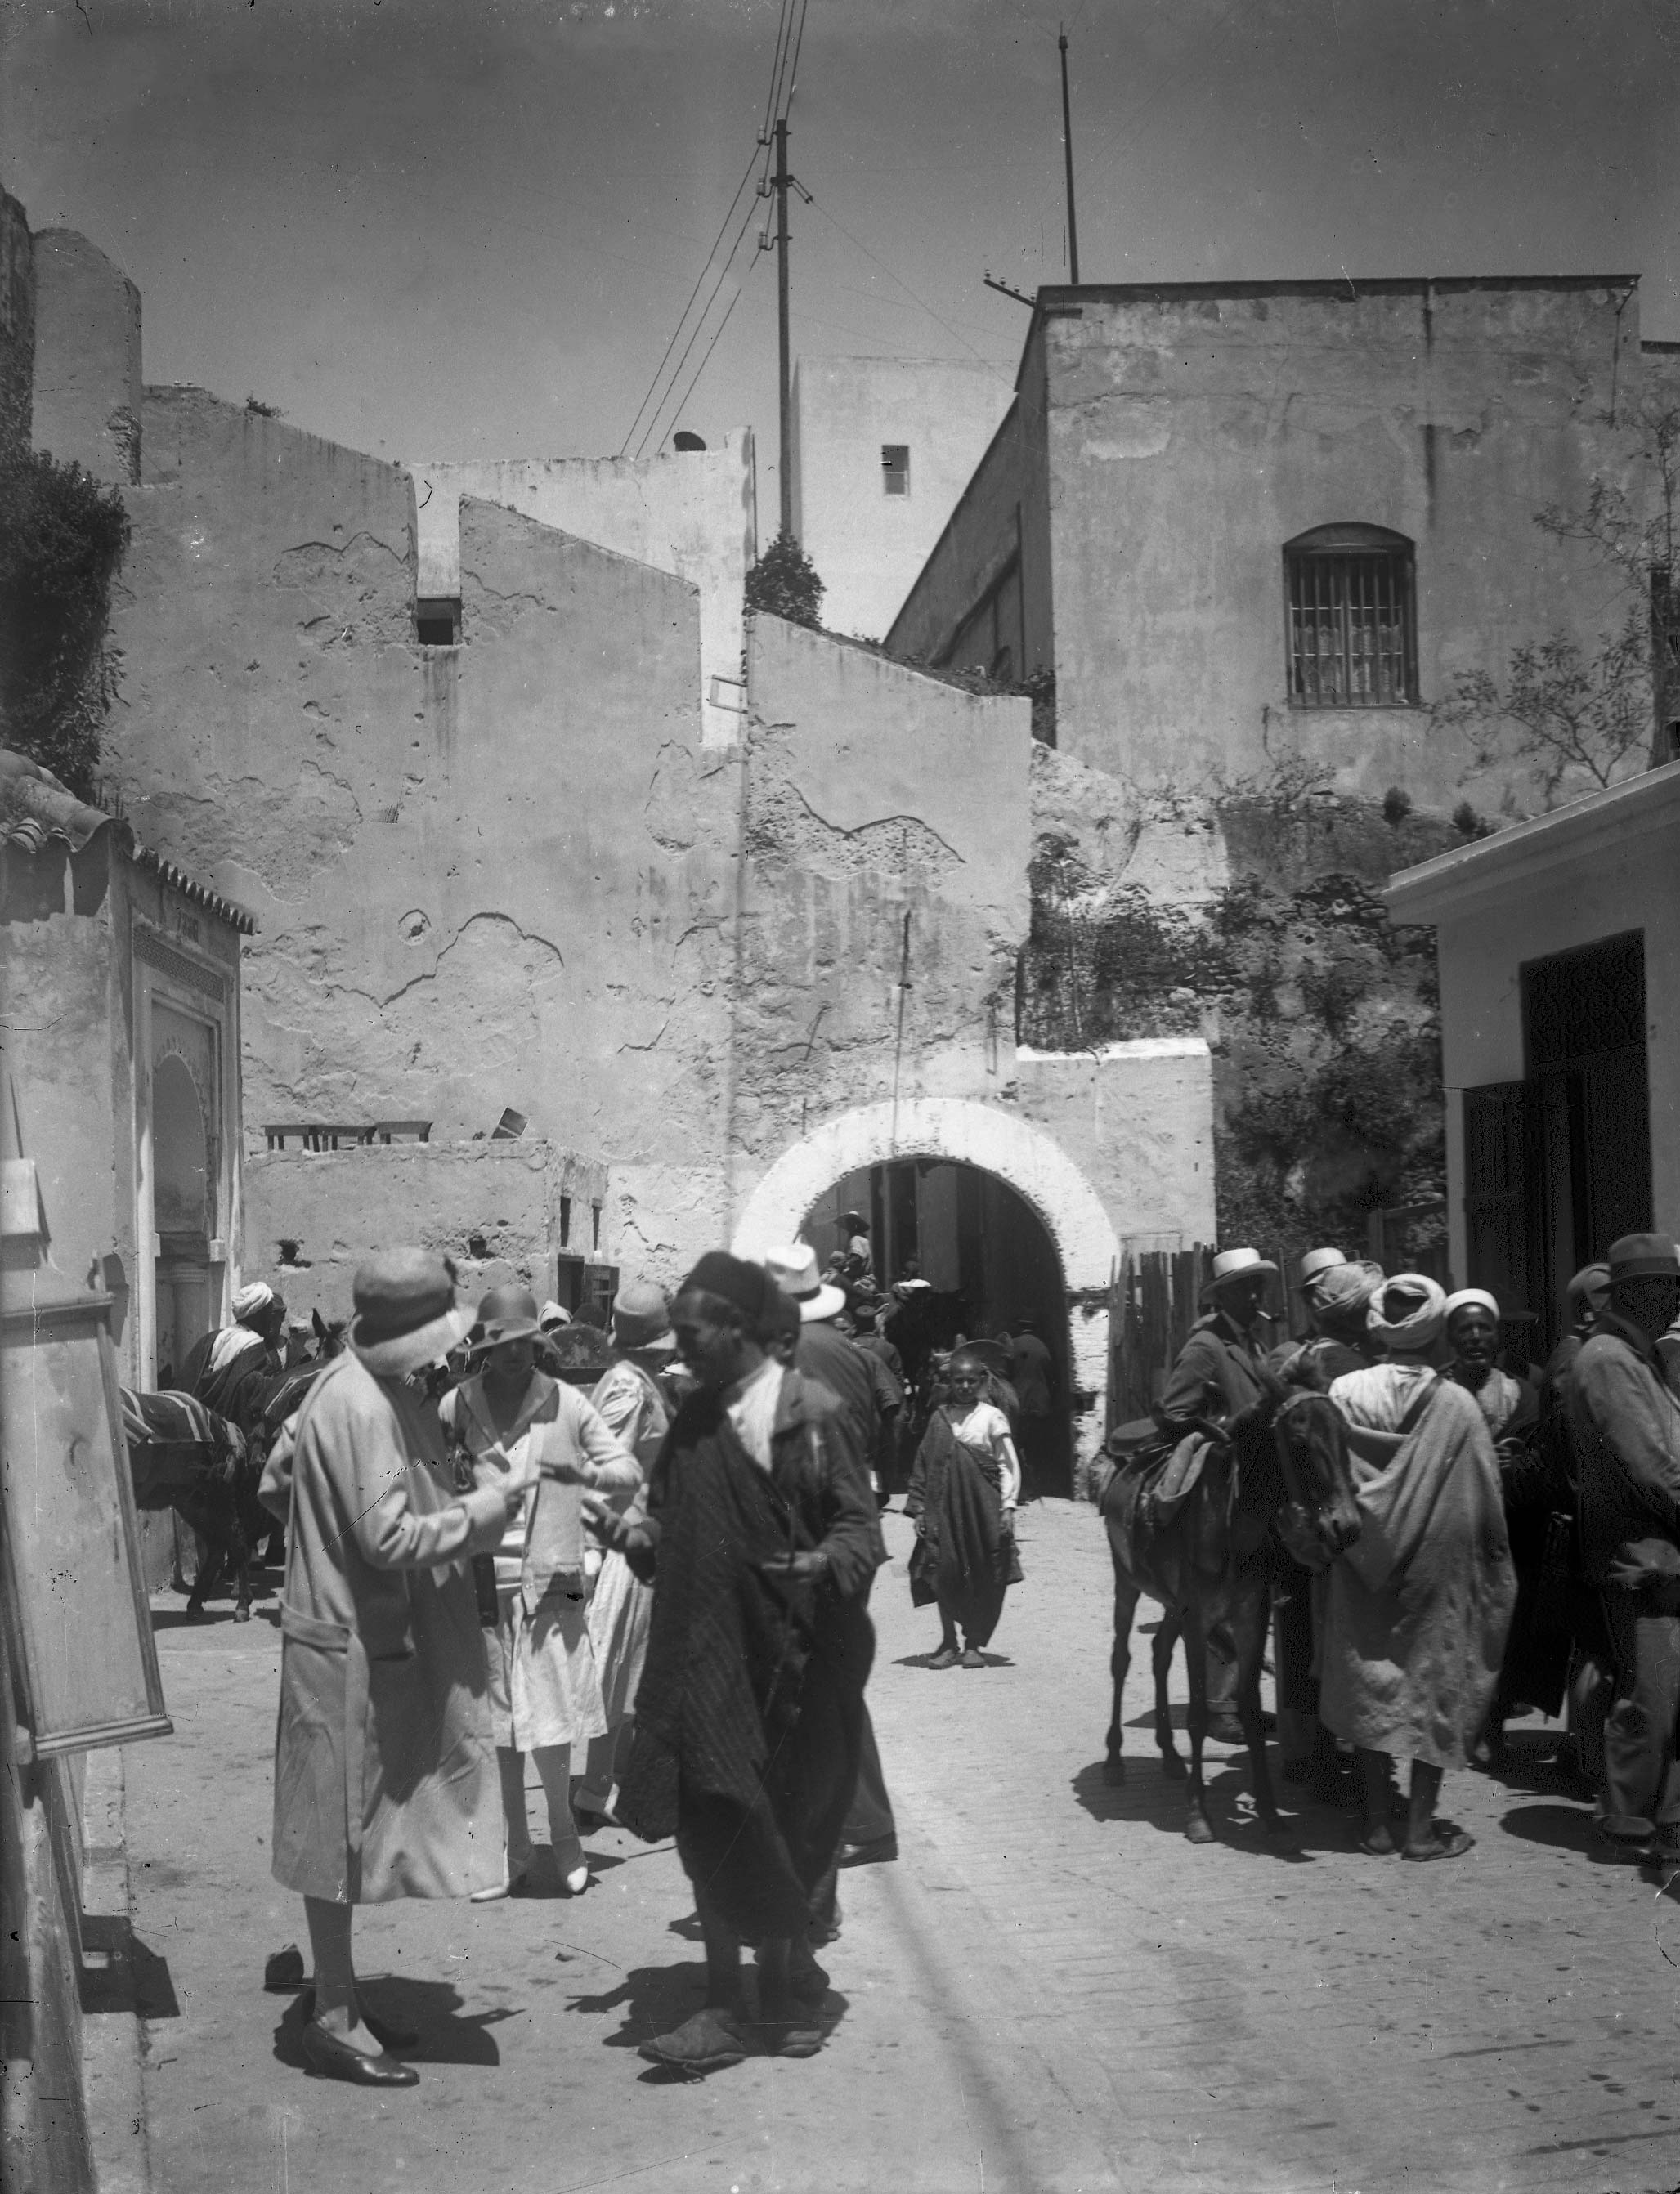 Moroccans and Europeans outside a city gate